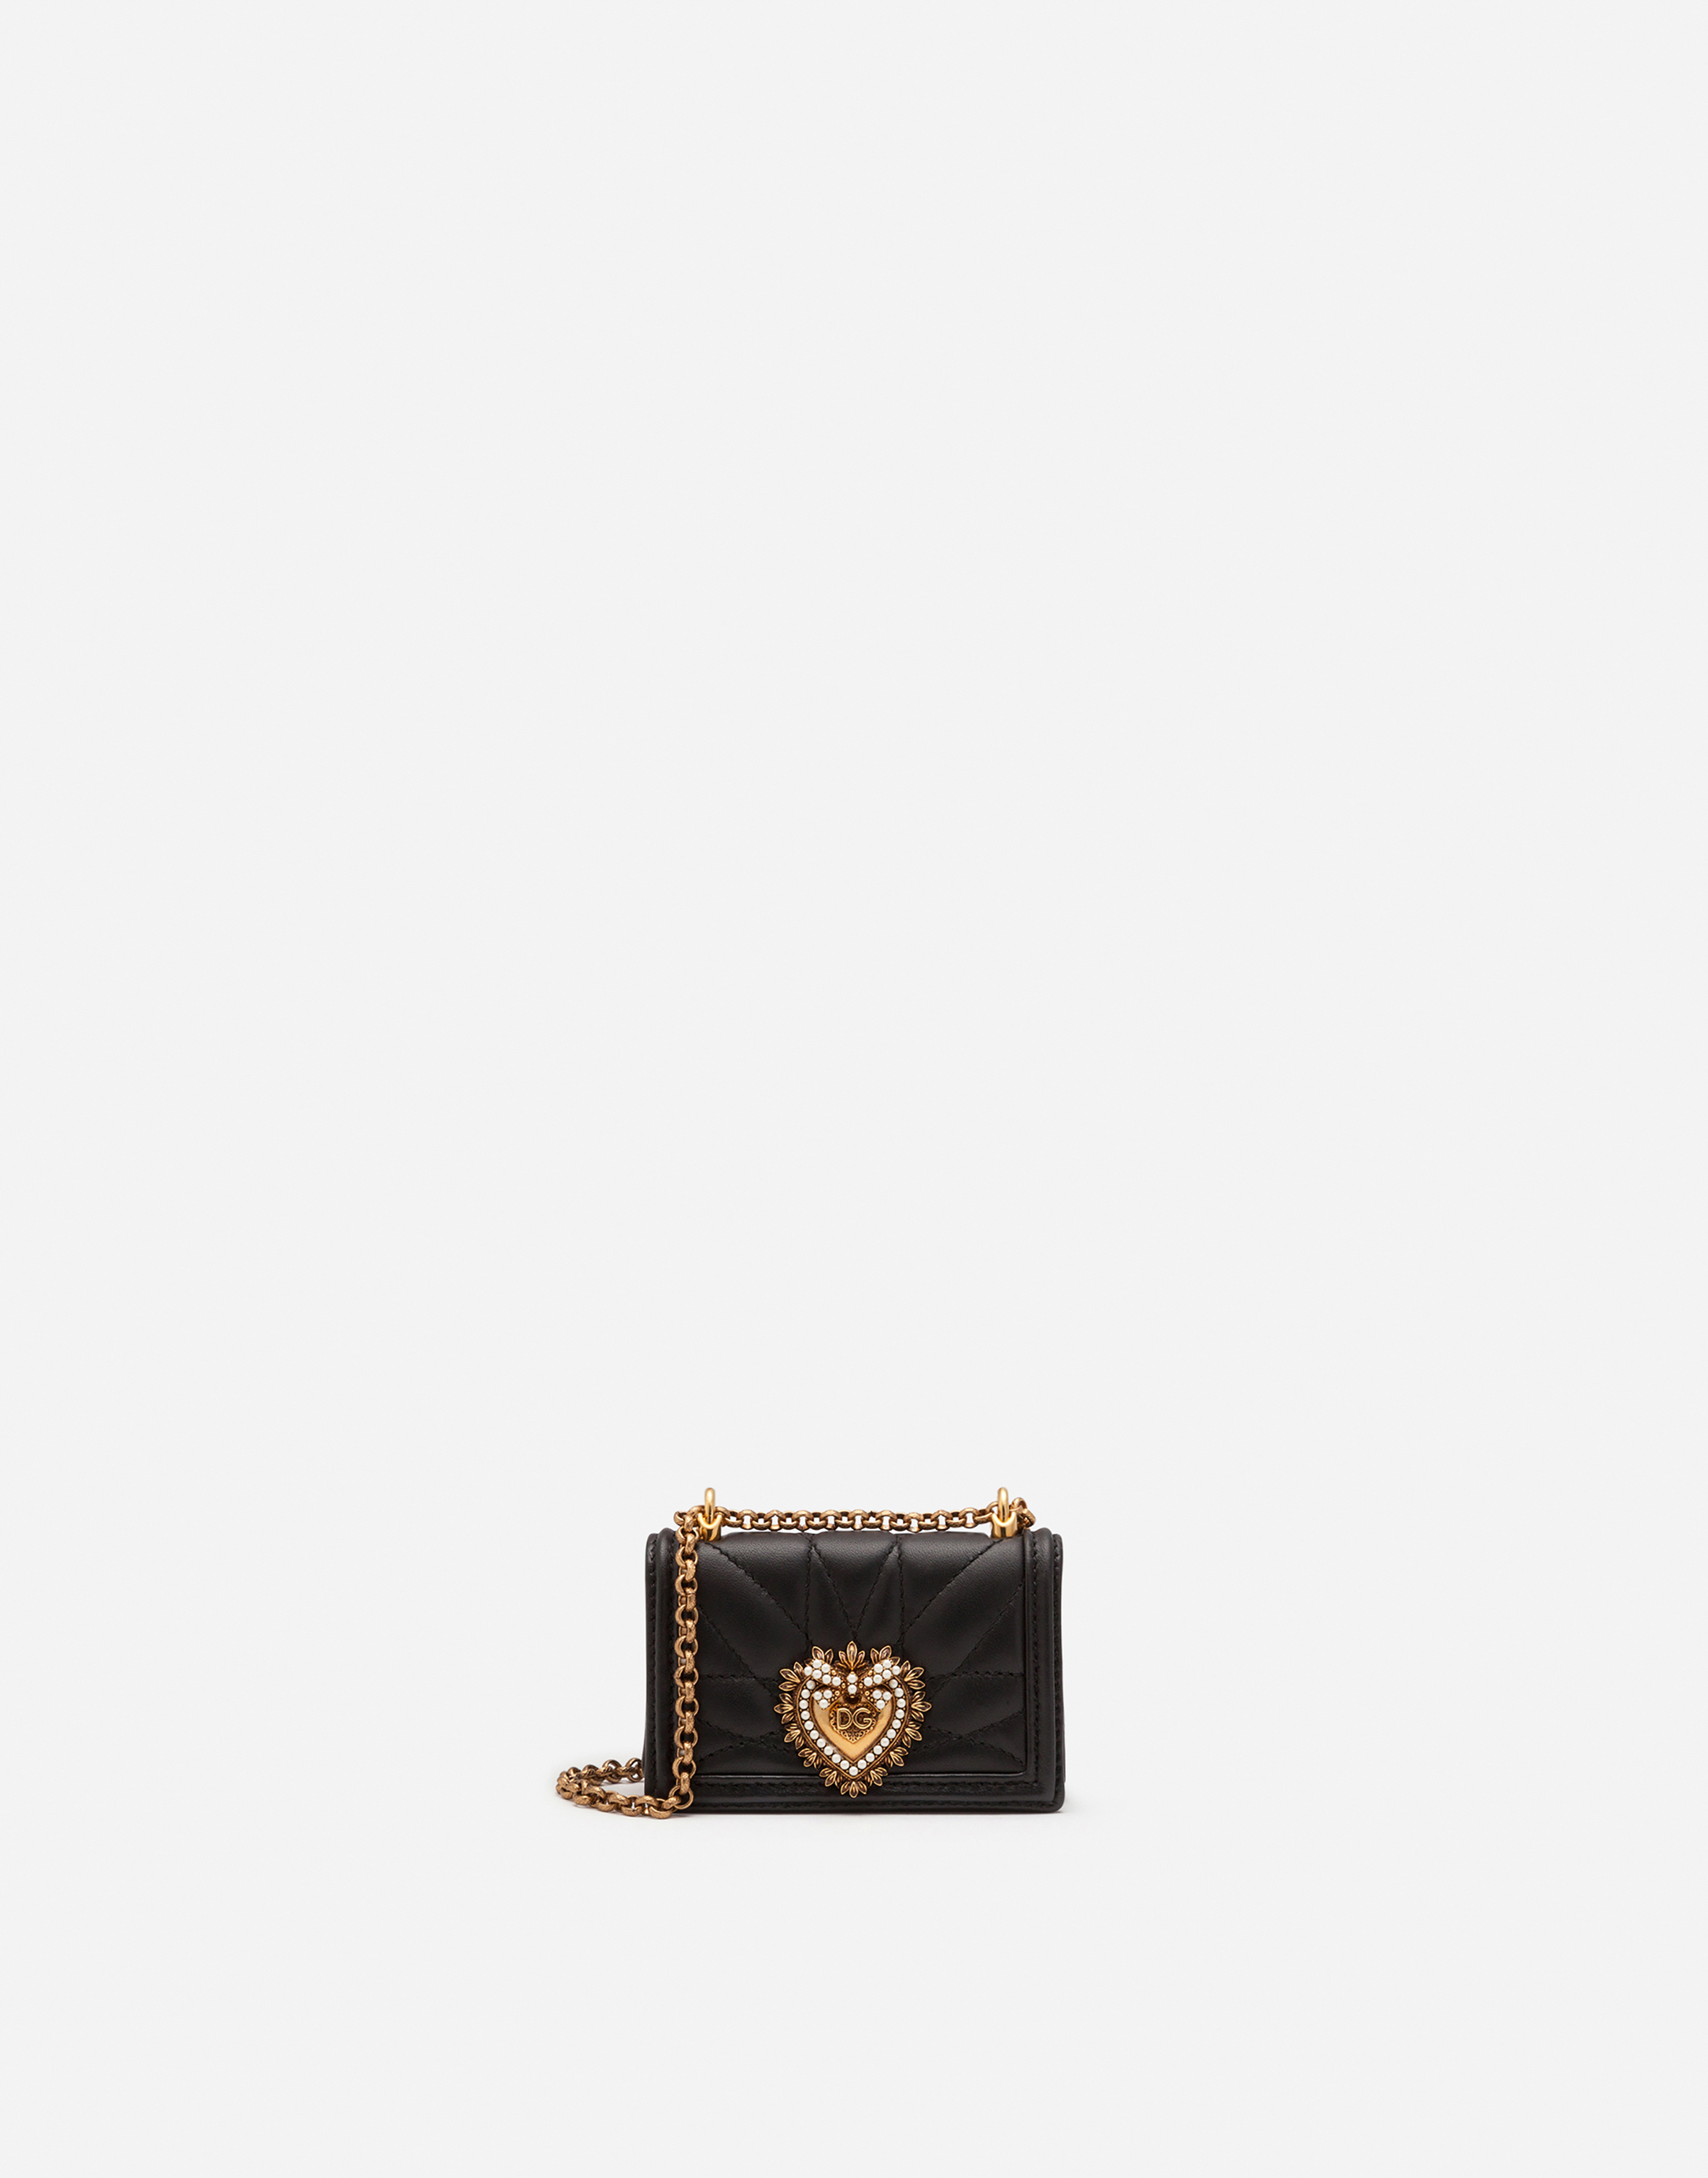 Dolce & Gabbana Devotion Micro Bag In Quilted Nappa Leather In Black